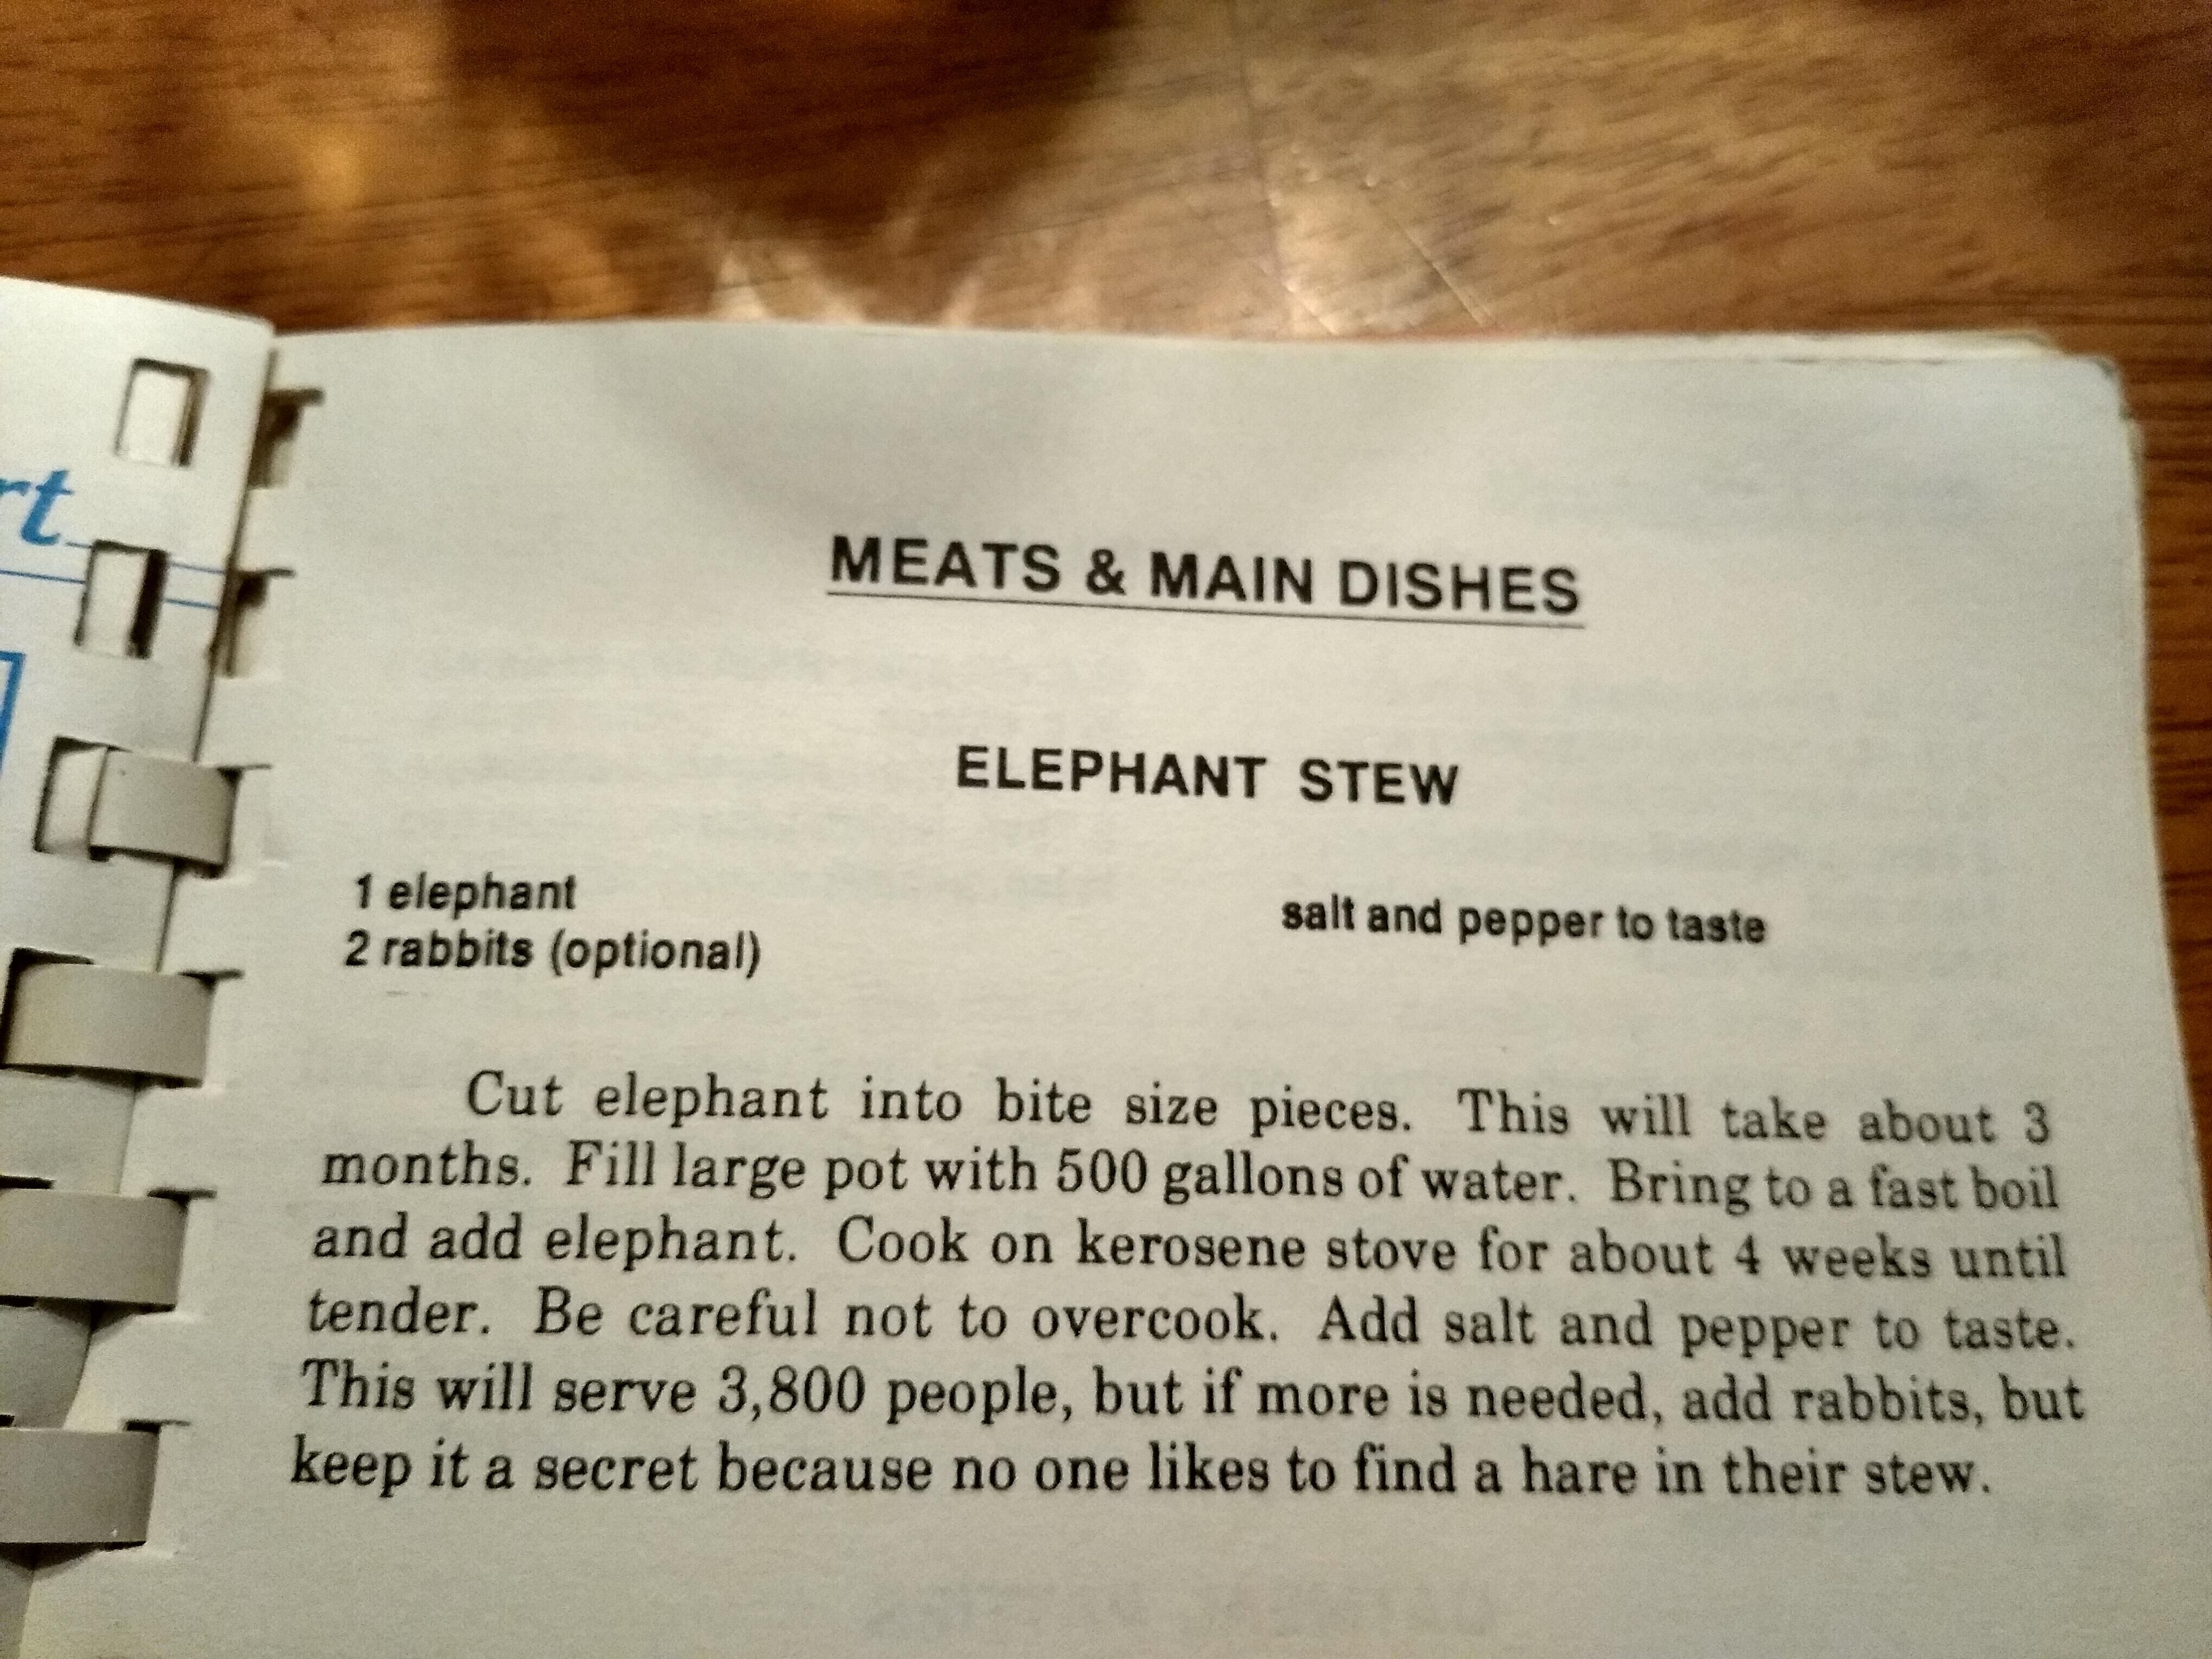 A local church created a cook book in the 60's. This was submitted by one of the churchgoers.